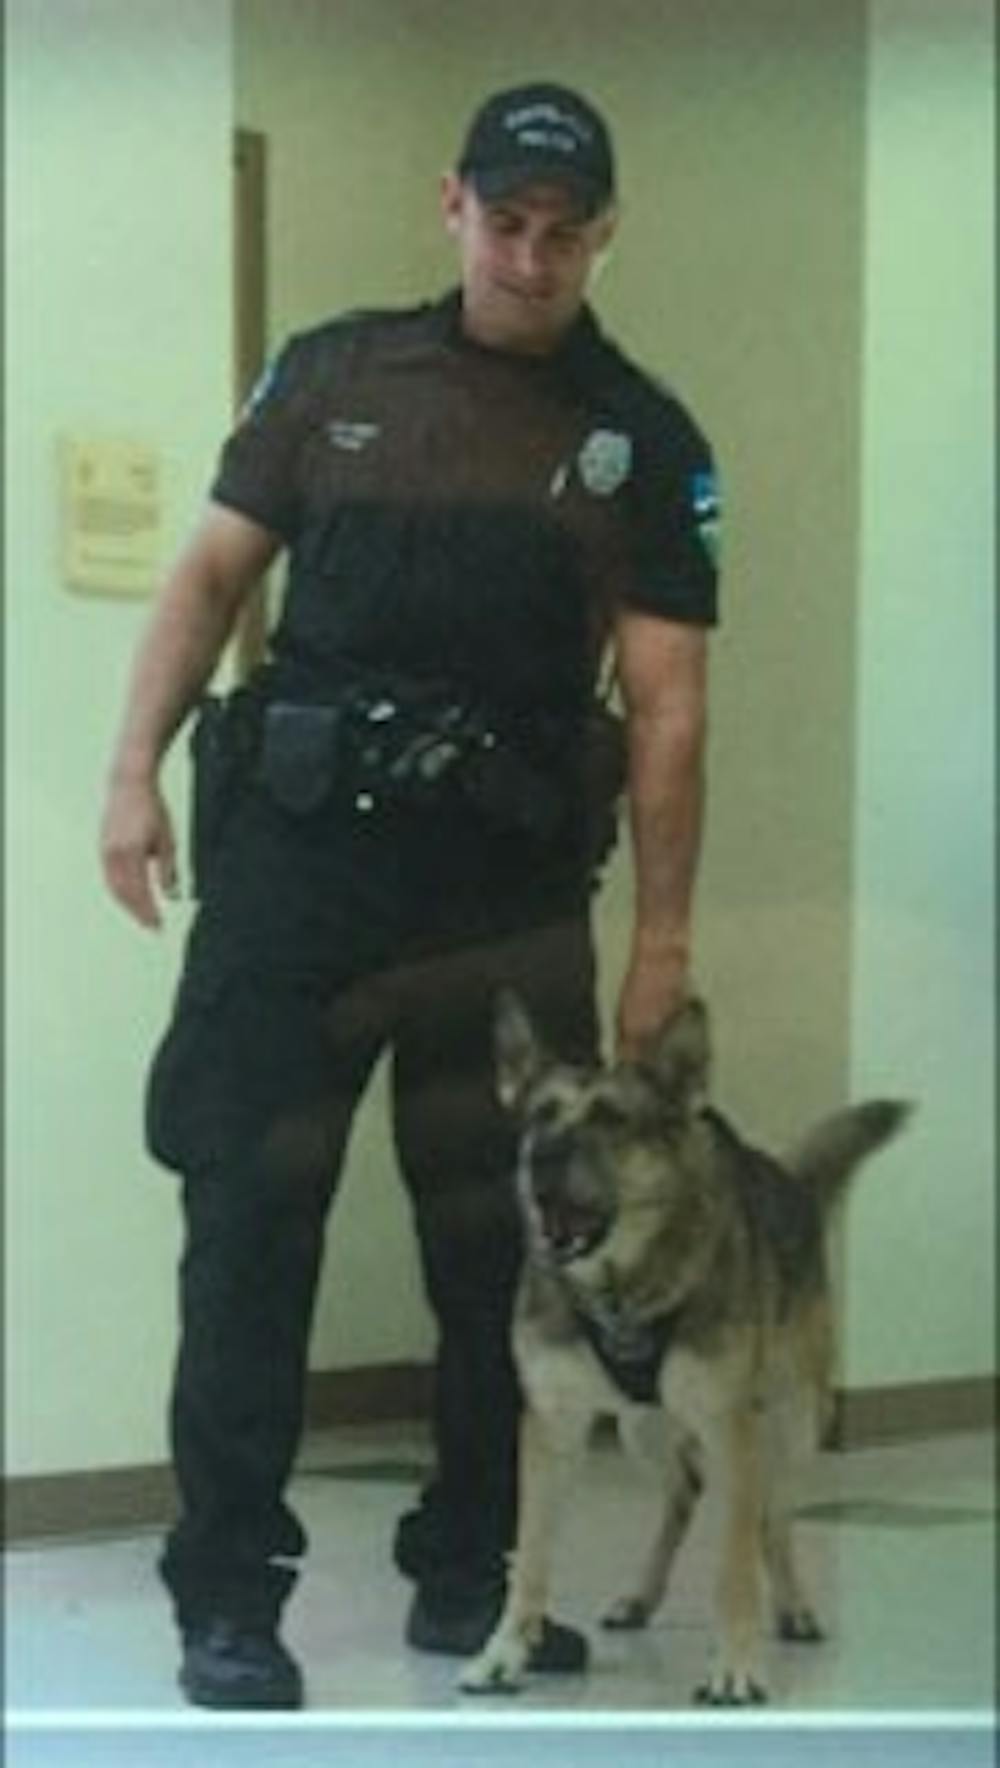 MJ barks while being held by her handler, officer David Funk. Photo courtesy of David Funk.